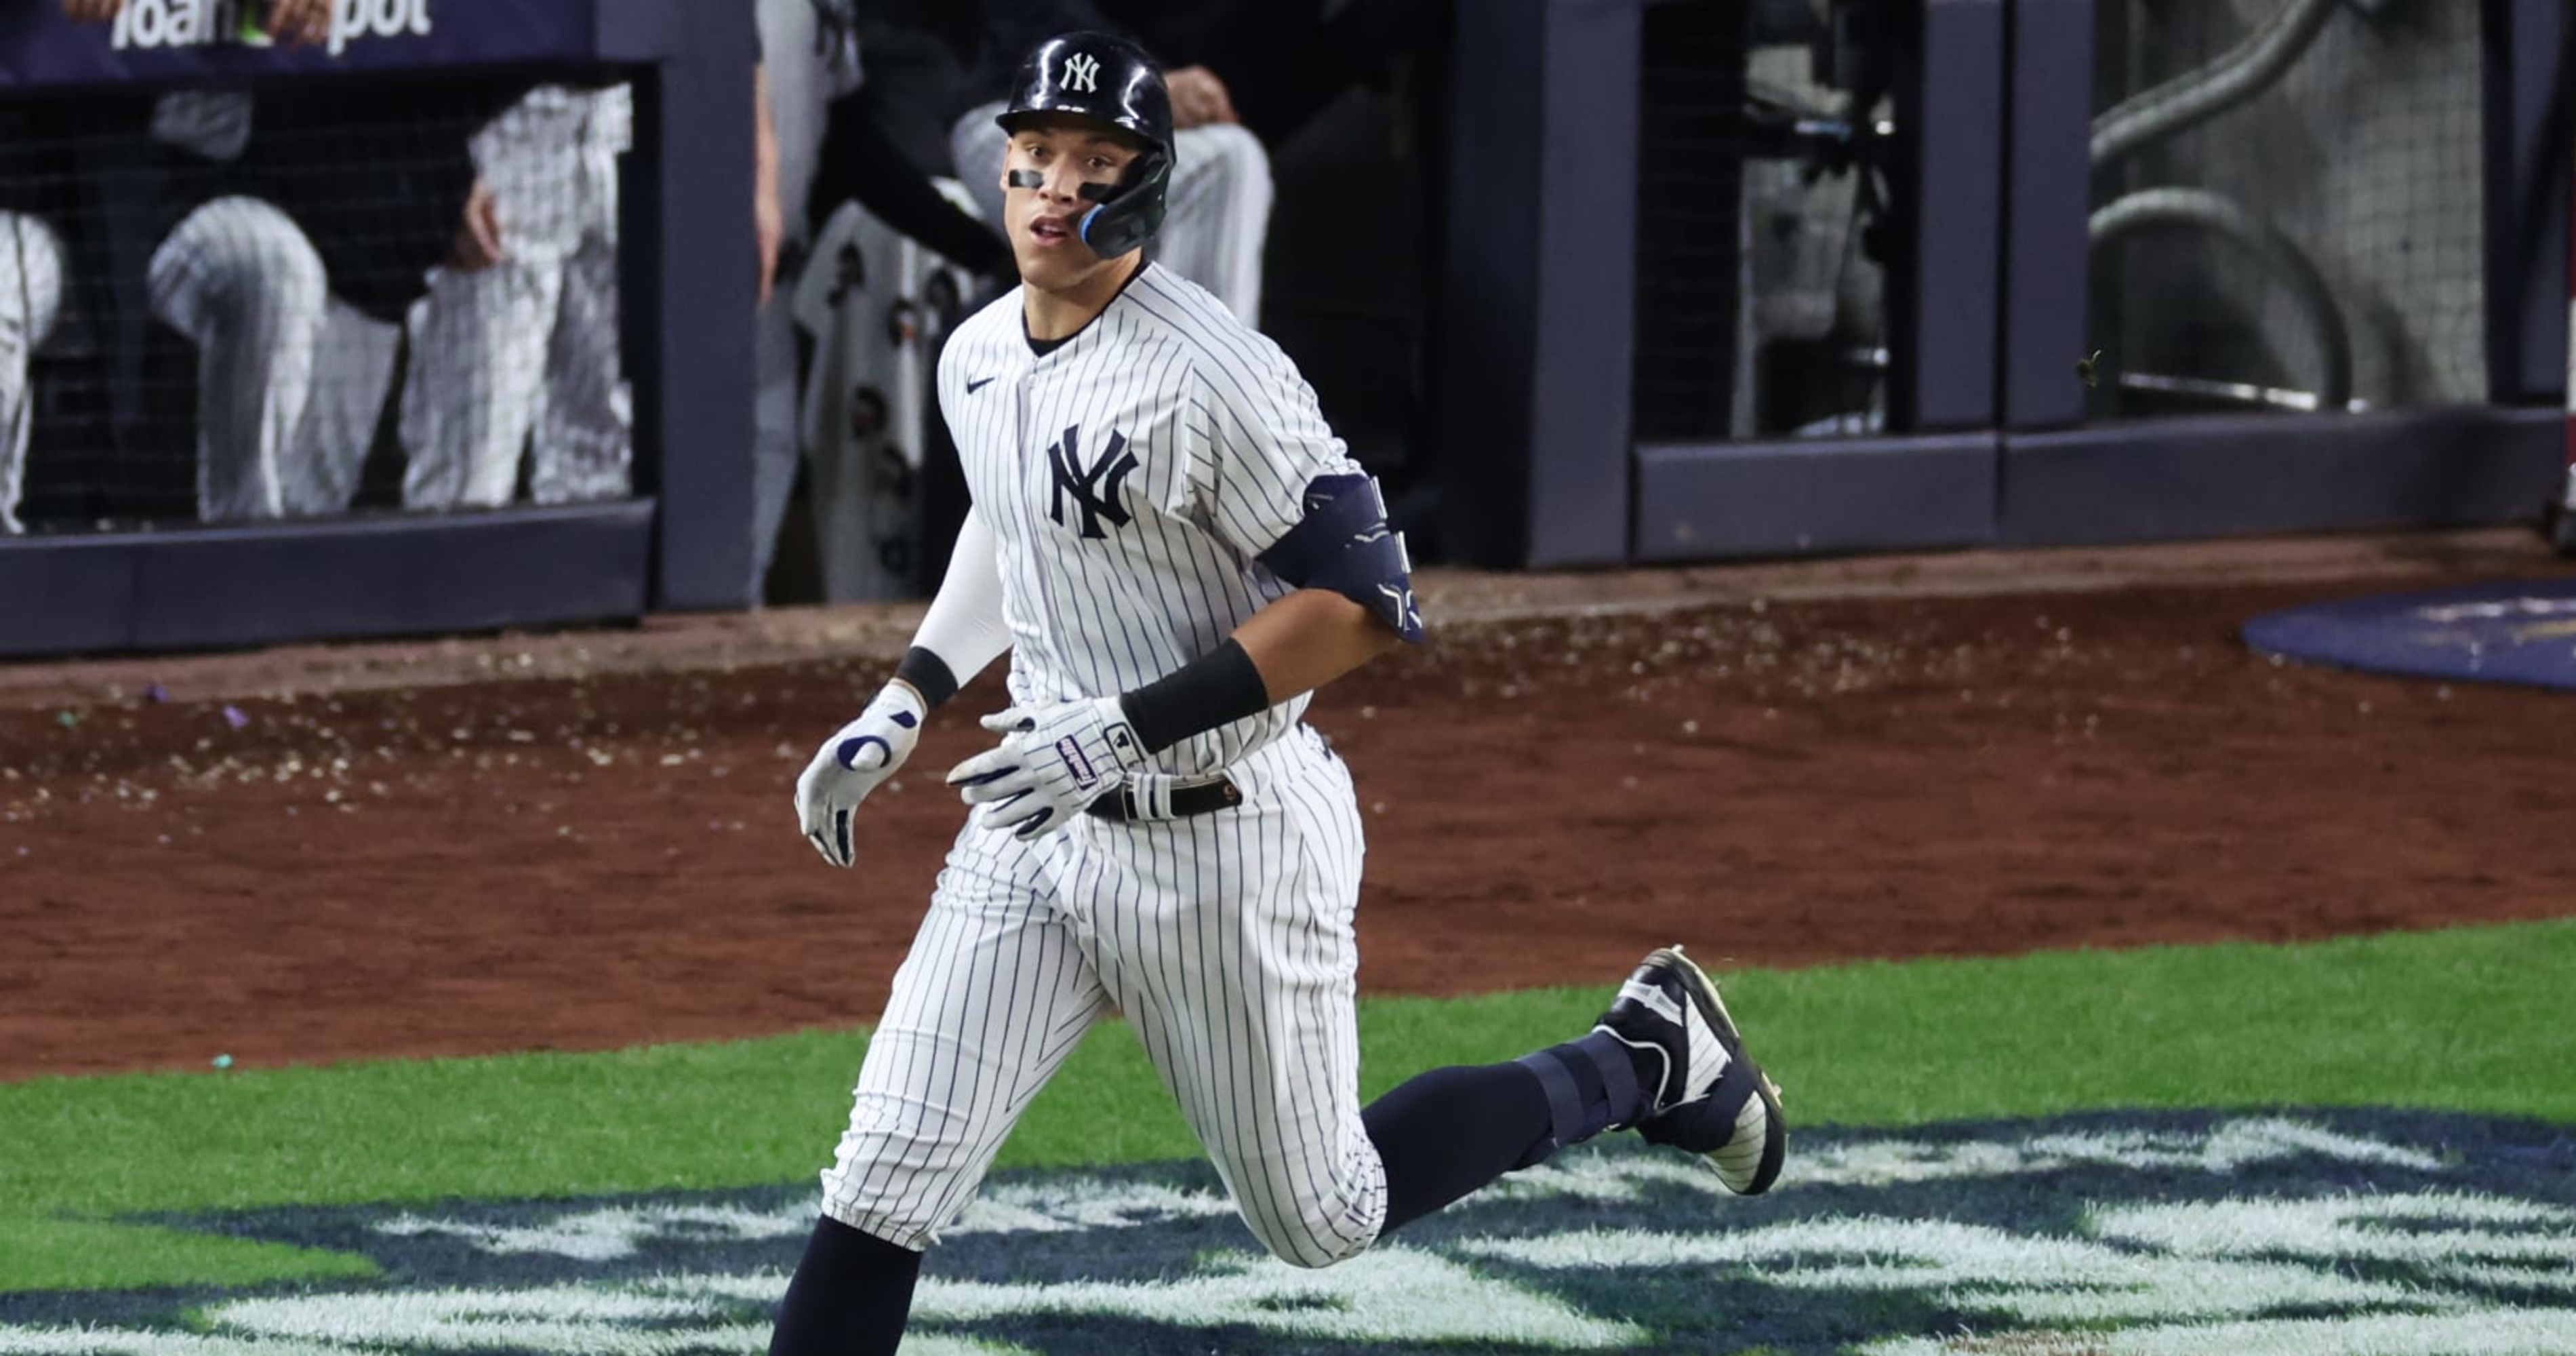 Could Dodgers actually land Aaron Judge? – NBC Sports Bay Area